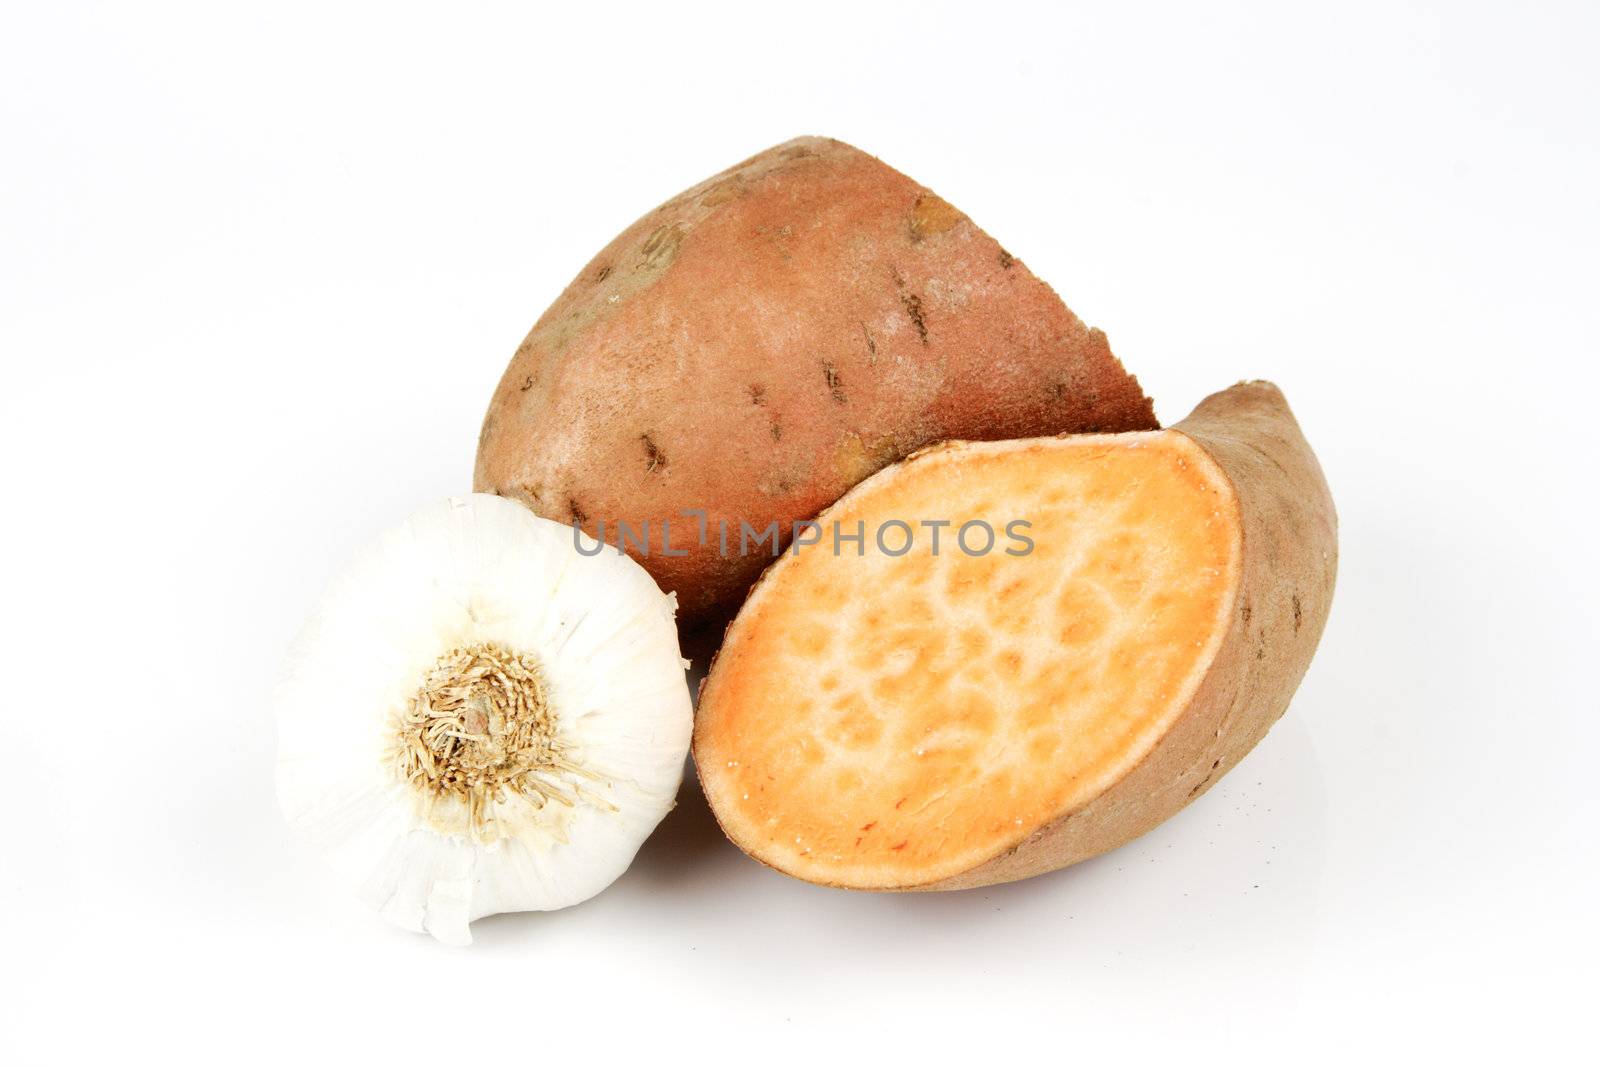 Sweet Potato cut in half with a white garlic bulb on a reflective white background